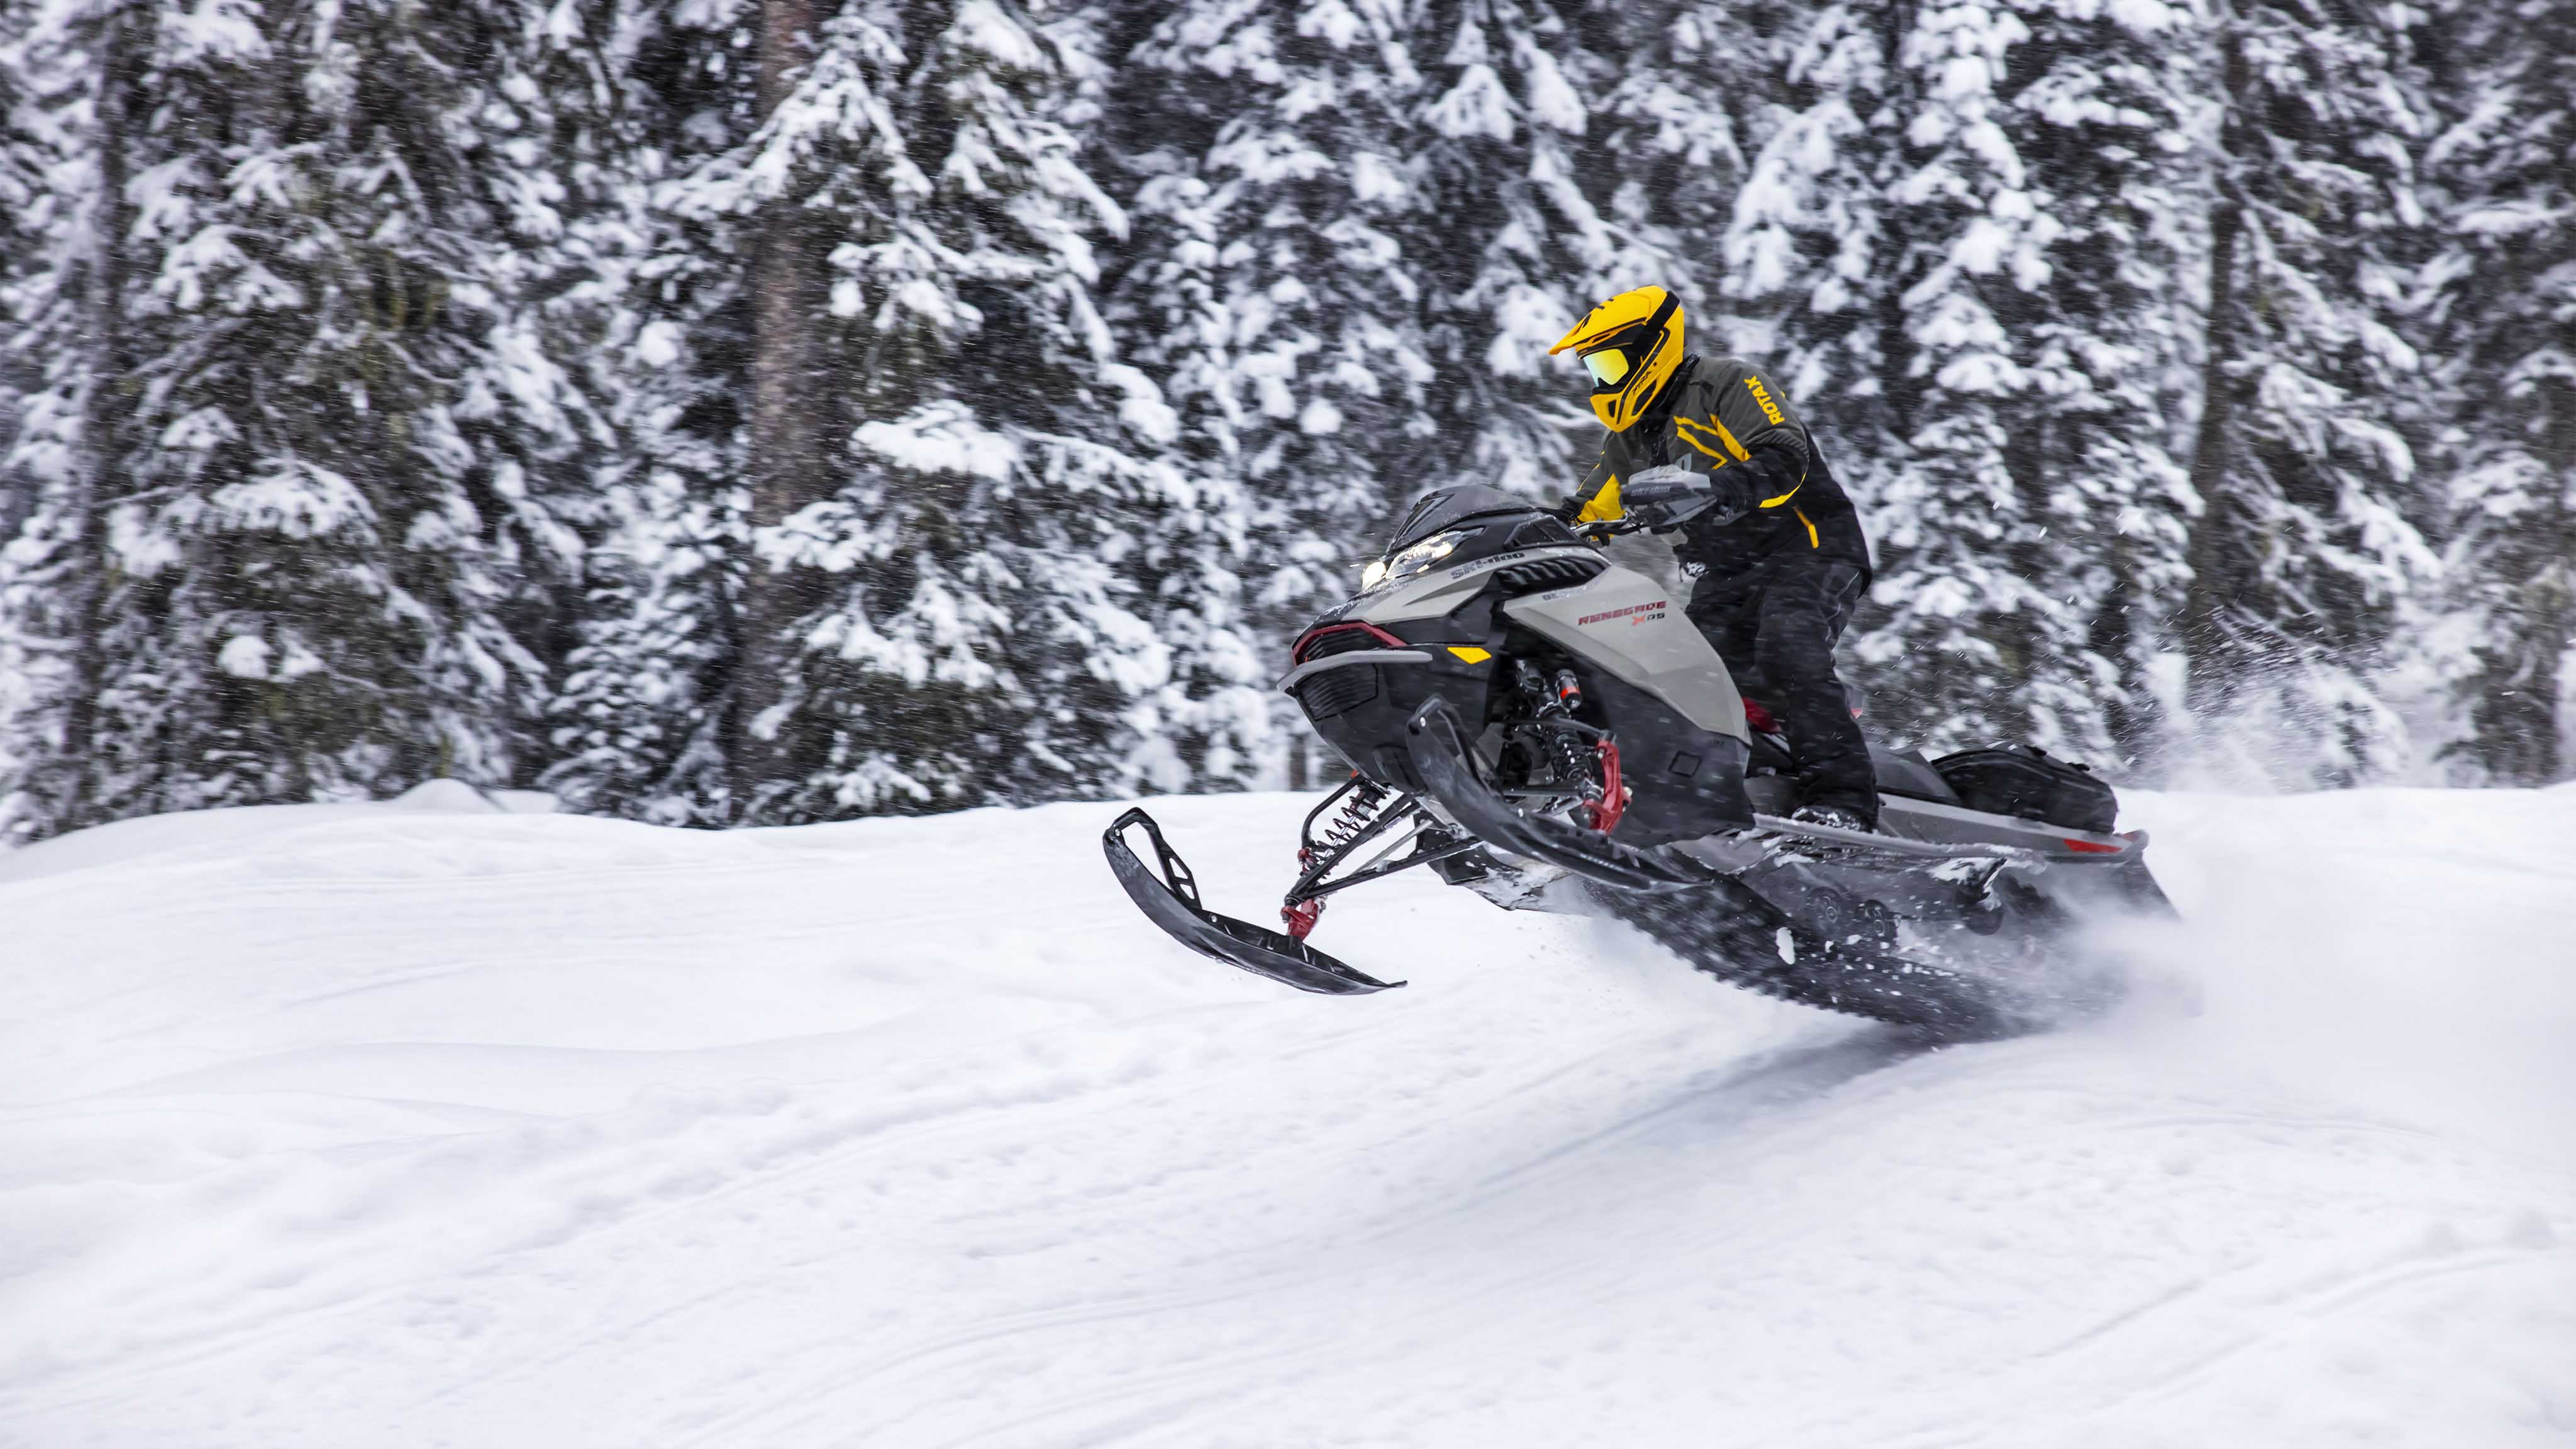 Man driving fast on a snowmobile trail with the new Ski-Doo Renegade